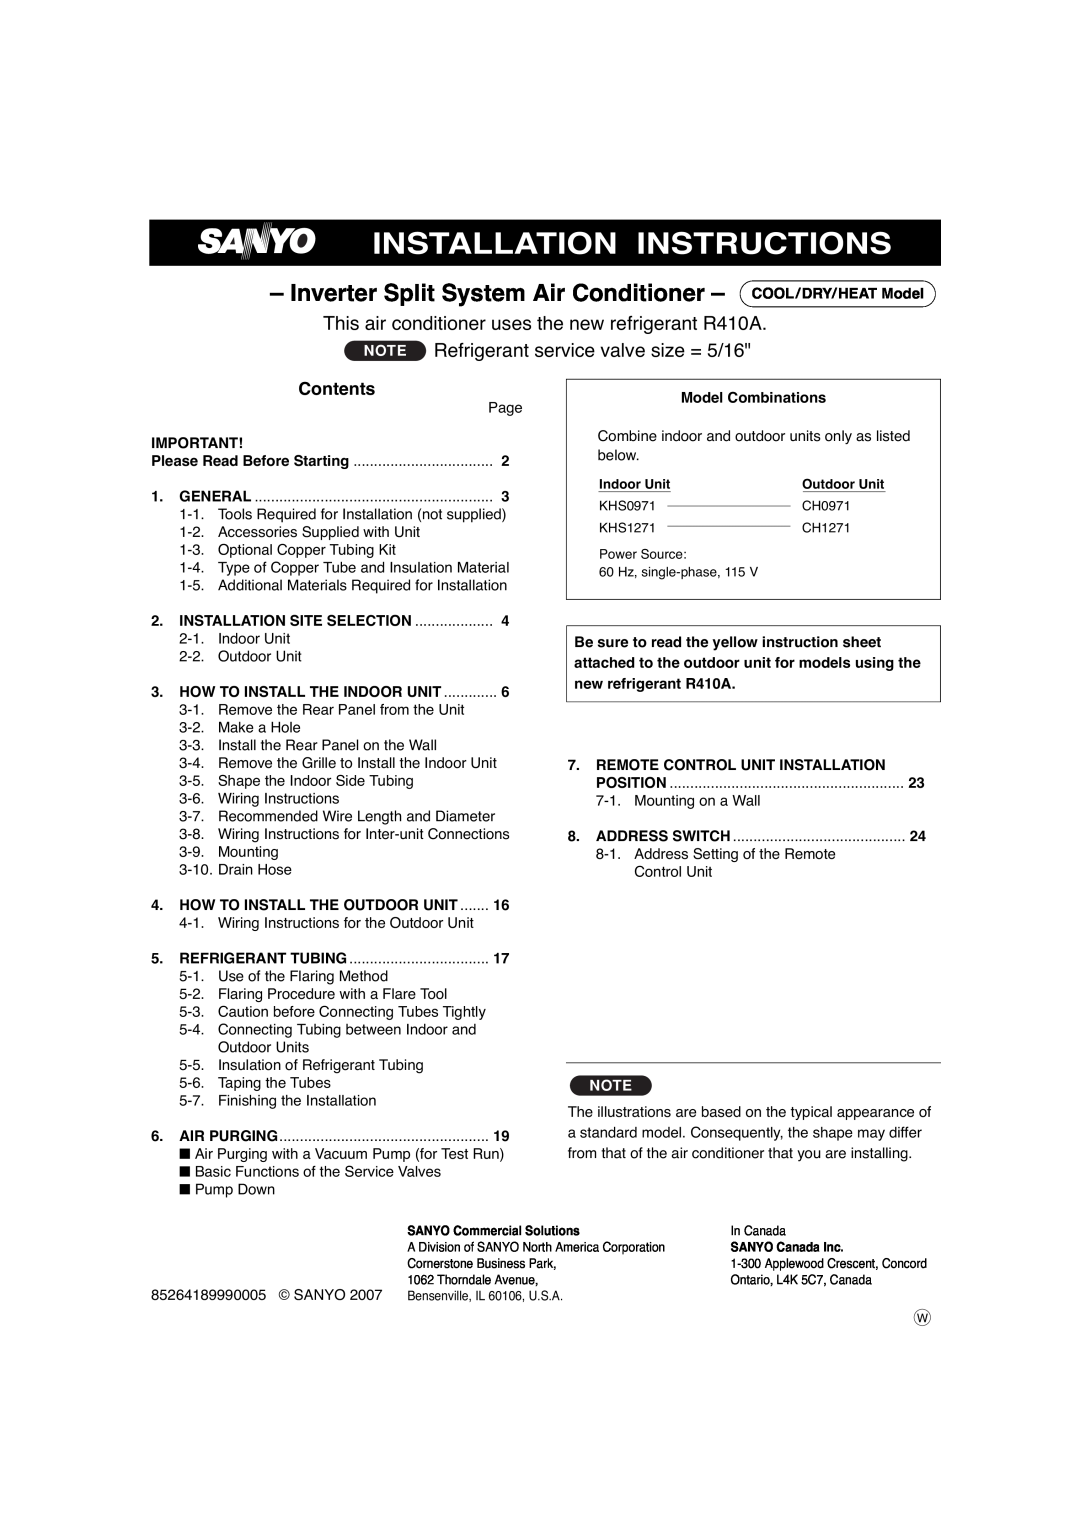 Sanyo CH1271, CH0971 service manual Contents, Installation Instructions, NOTE Refrigerant service valve size = 5/16 